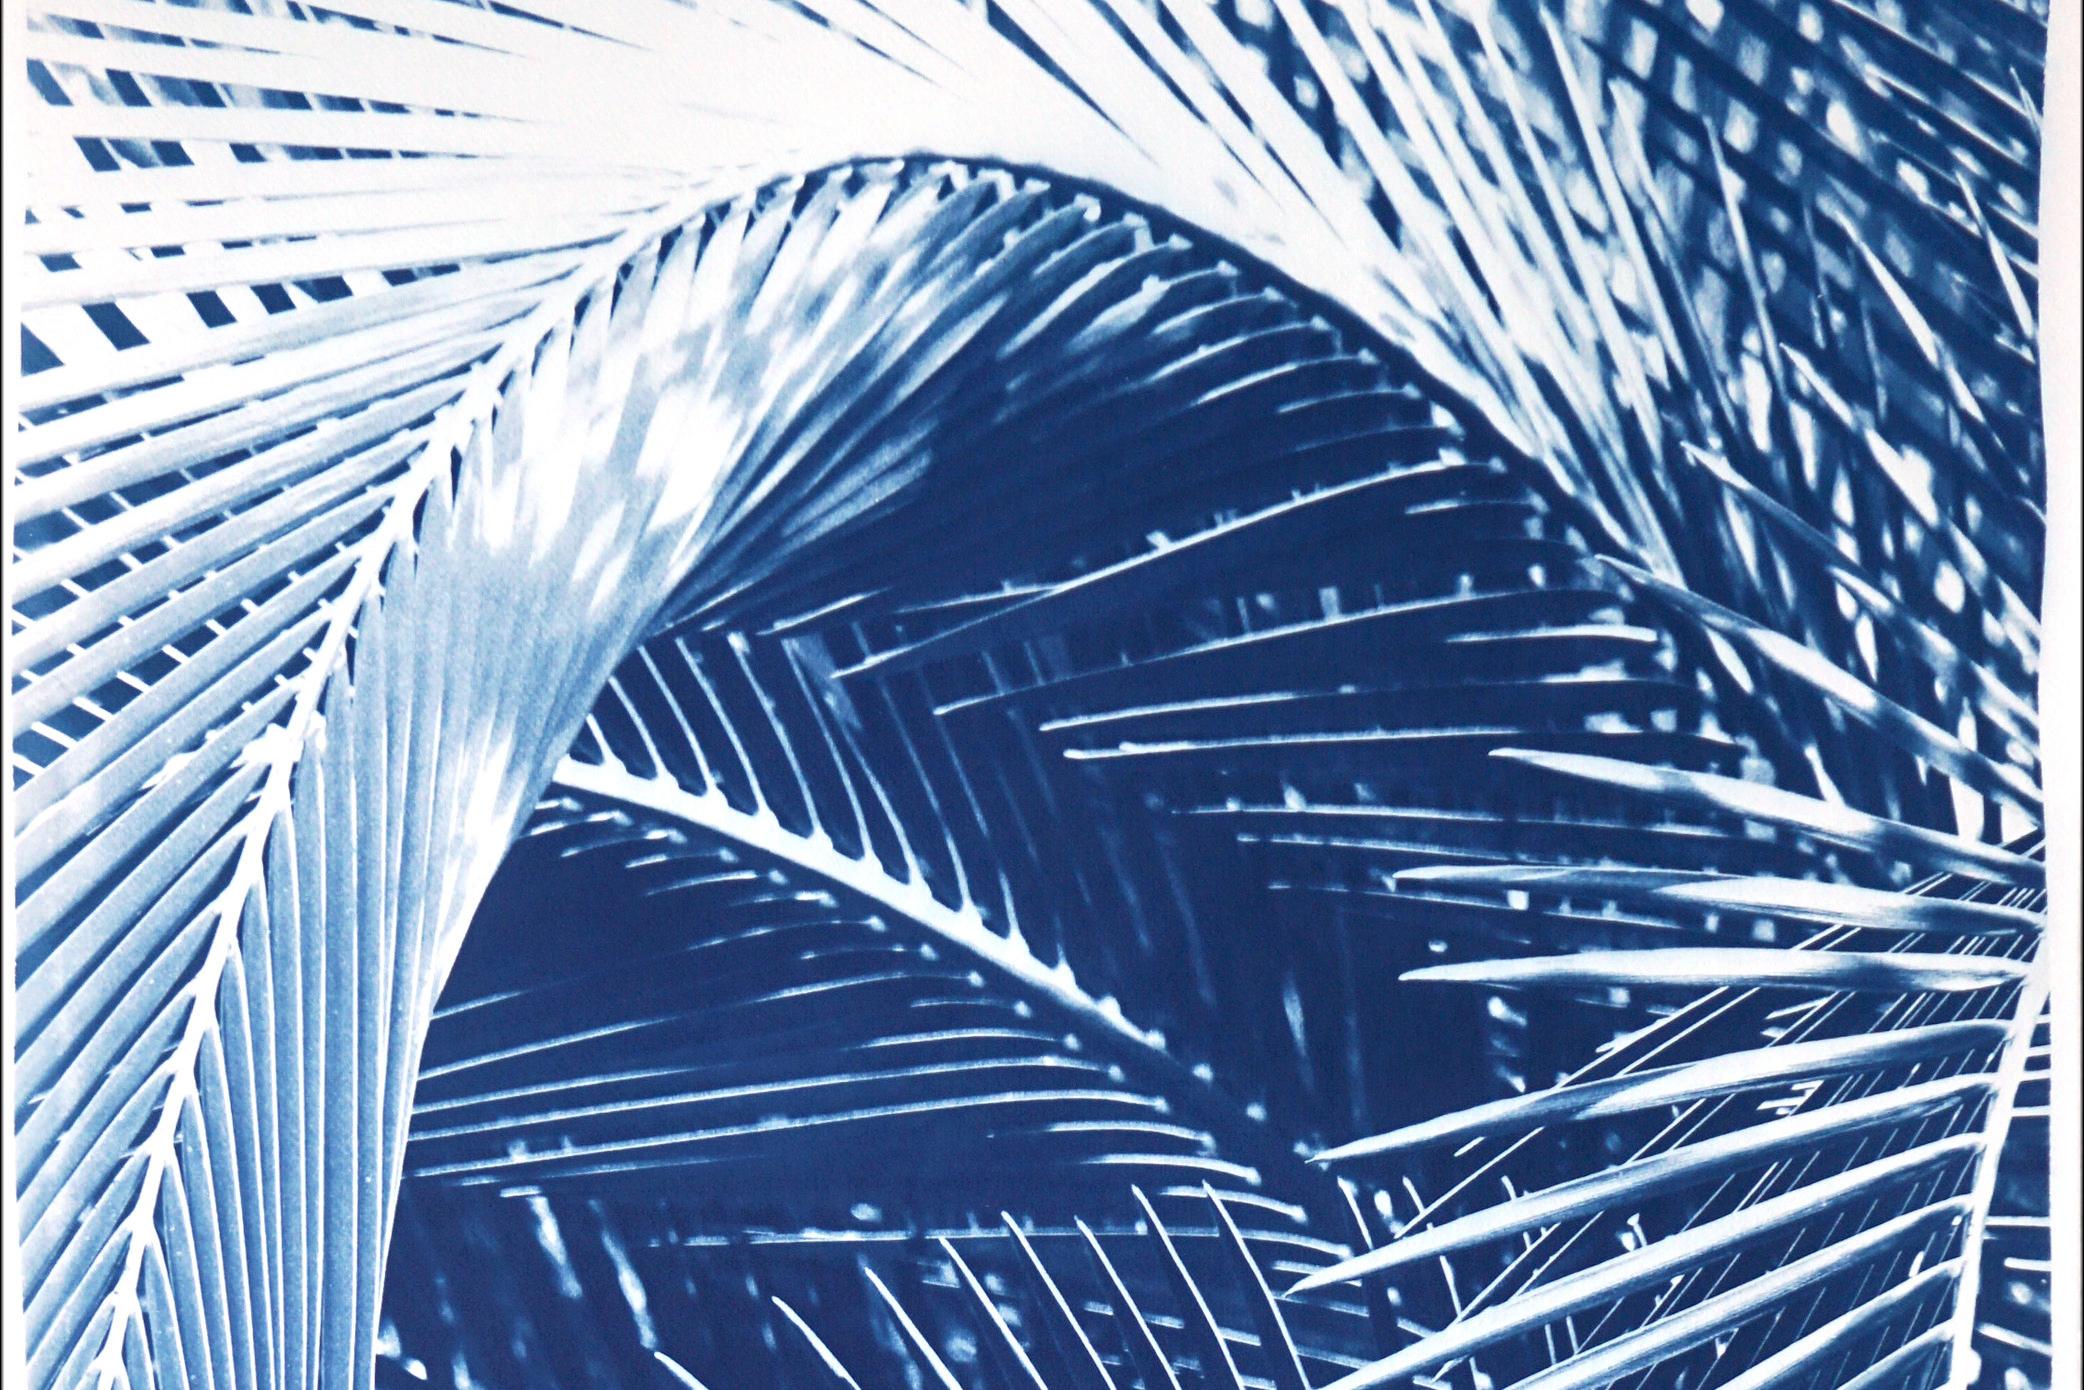 Botanical Triptych Cyanotype Print of Shady Majesty Palm Leaves Garden in Blue  For Sale 2